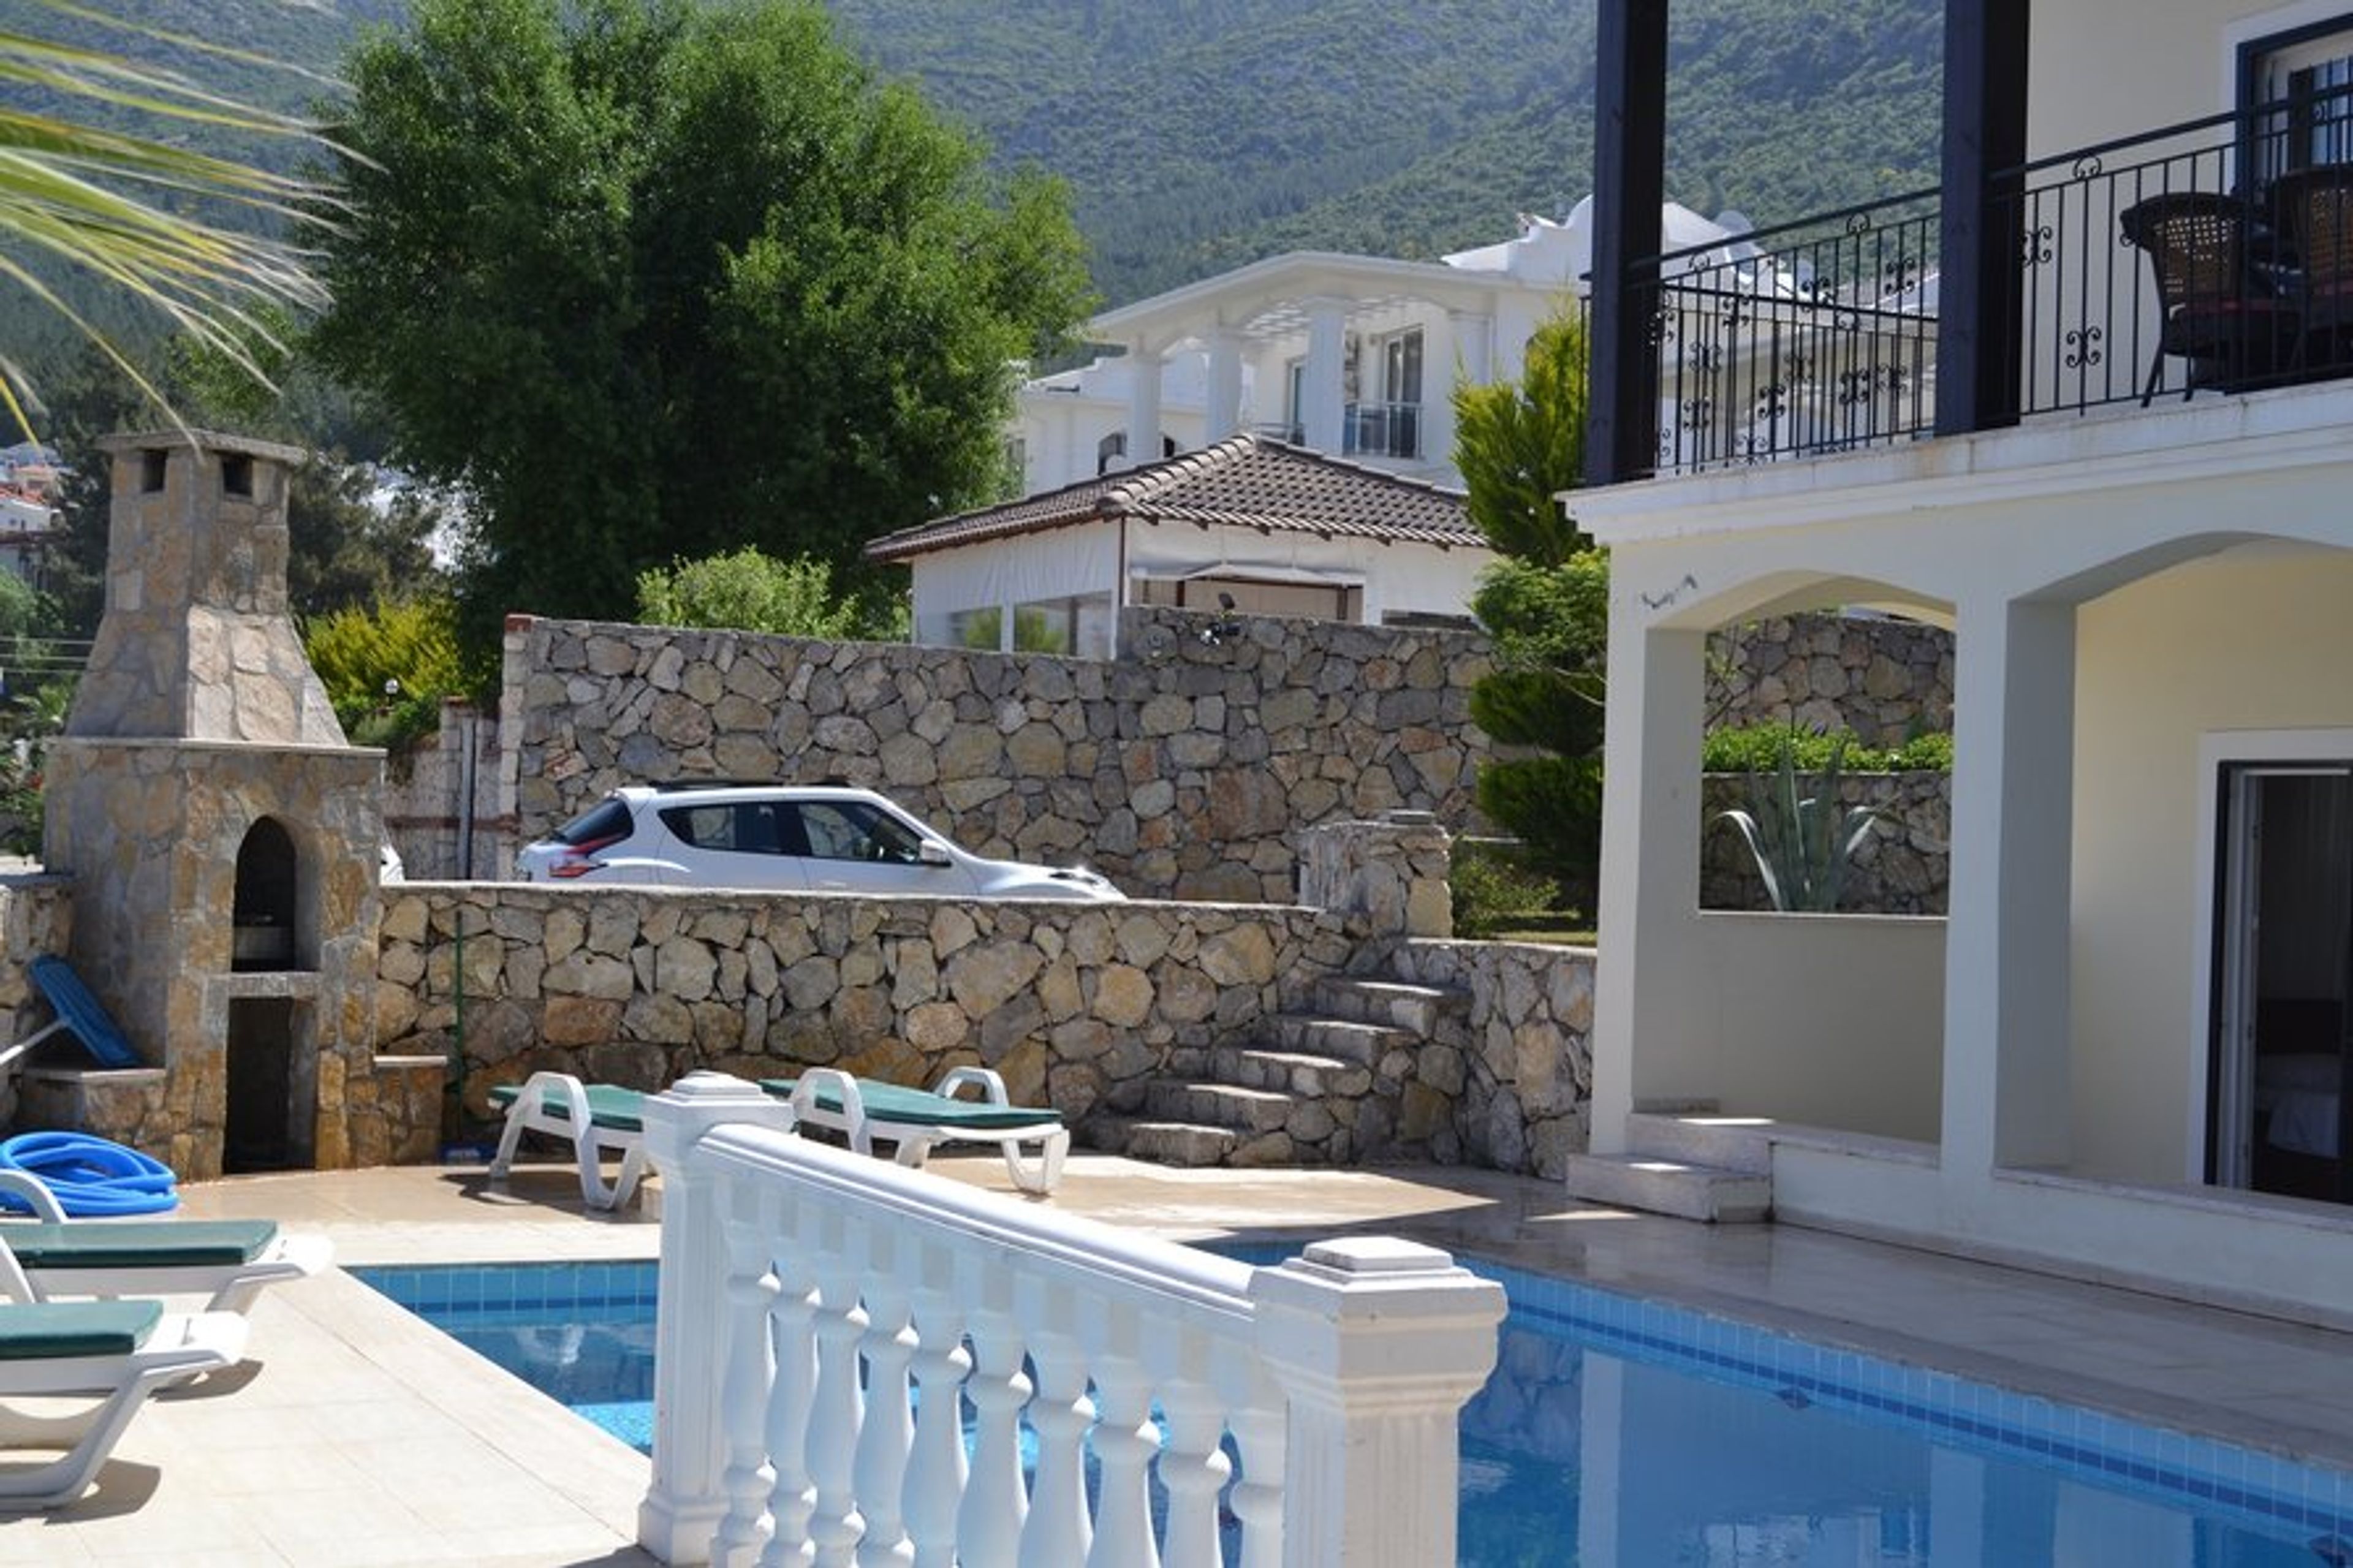 Akaysa villa private pool and off stree parking